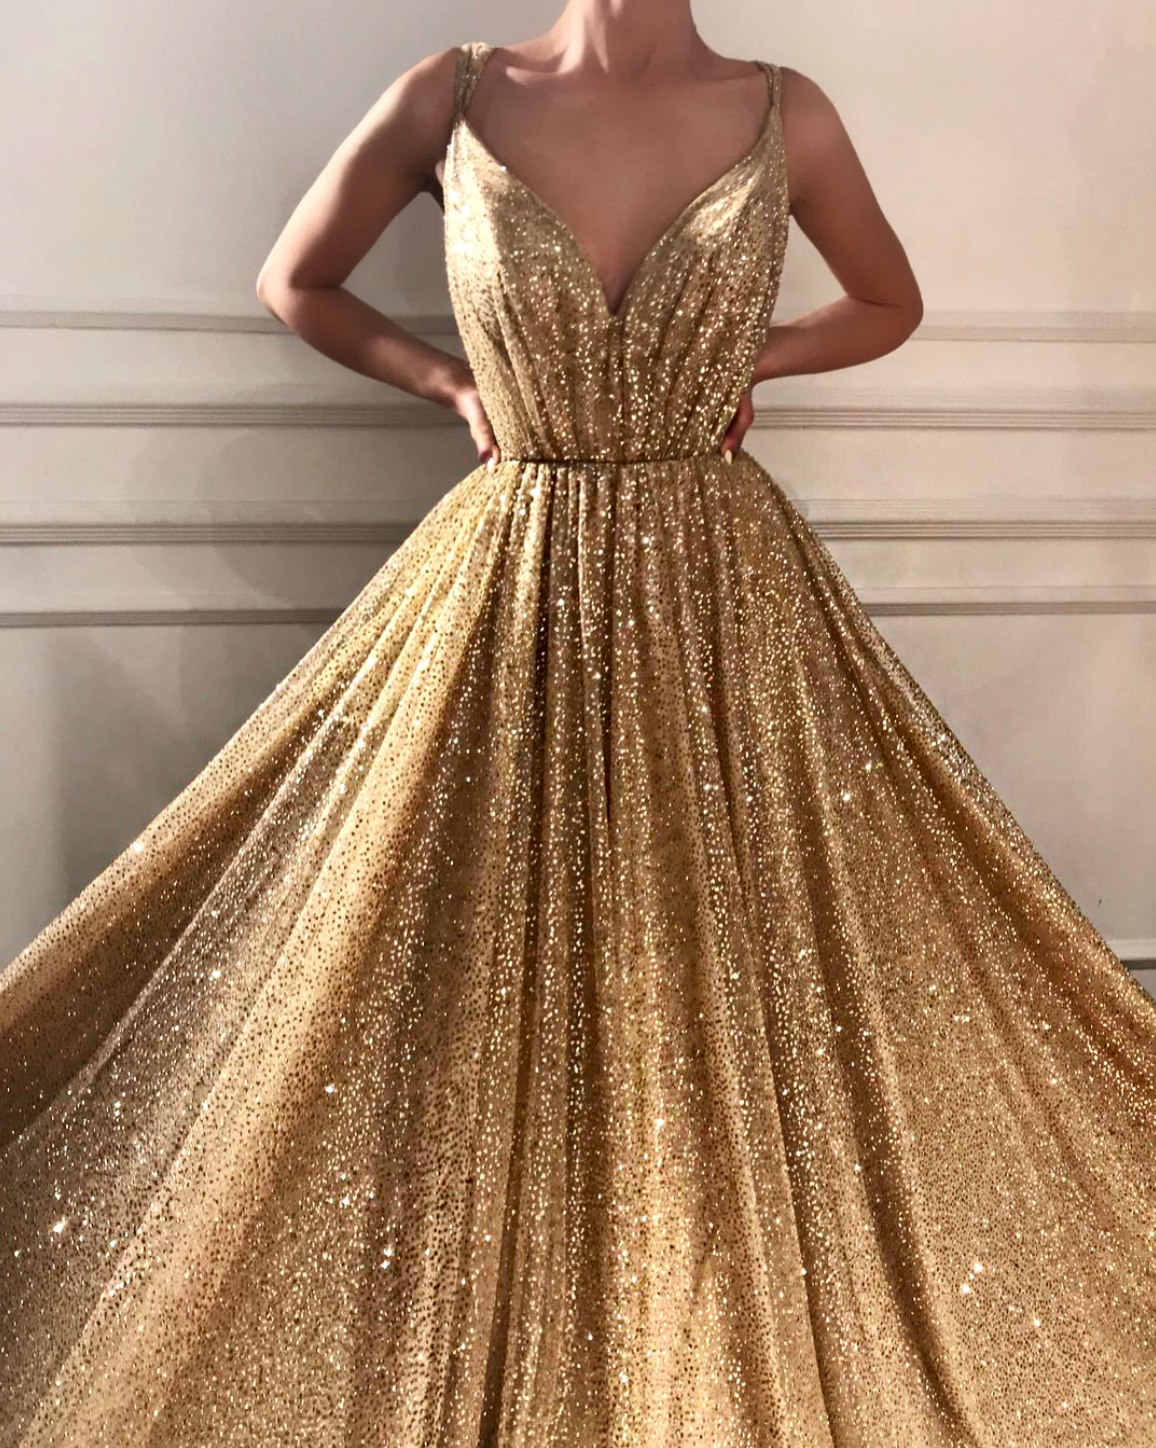 Gold A-Line dress with spaghetti straps, v-neck and sequins